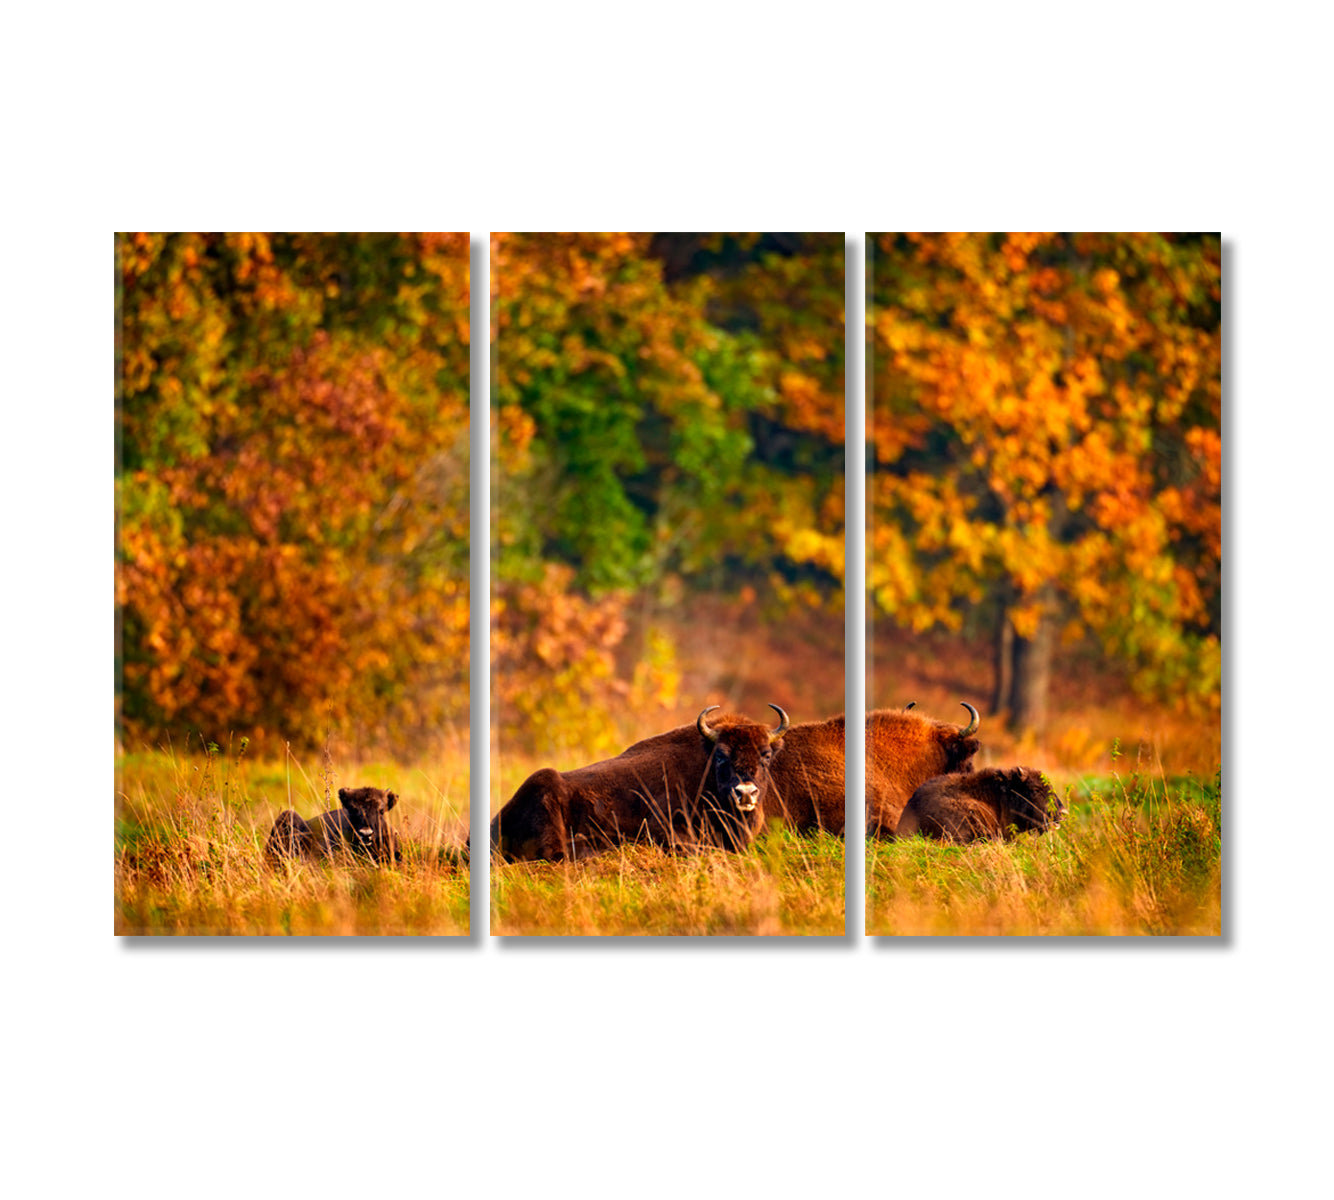 Bison Family in Autumn Forest Canvas Print-Canvas Print-CetArt-3 Panels-36x24 inches-CetArt